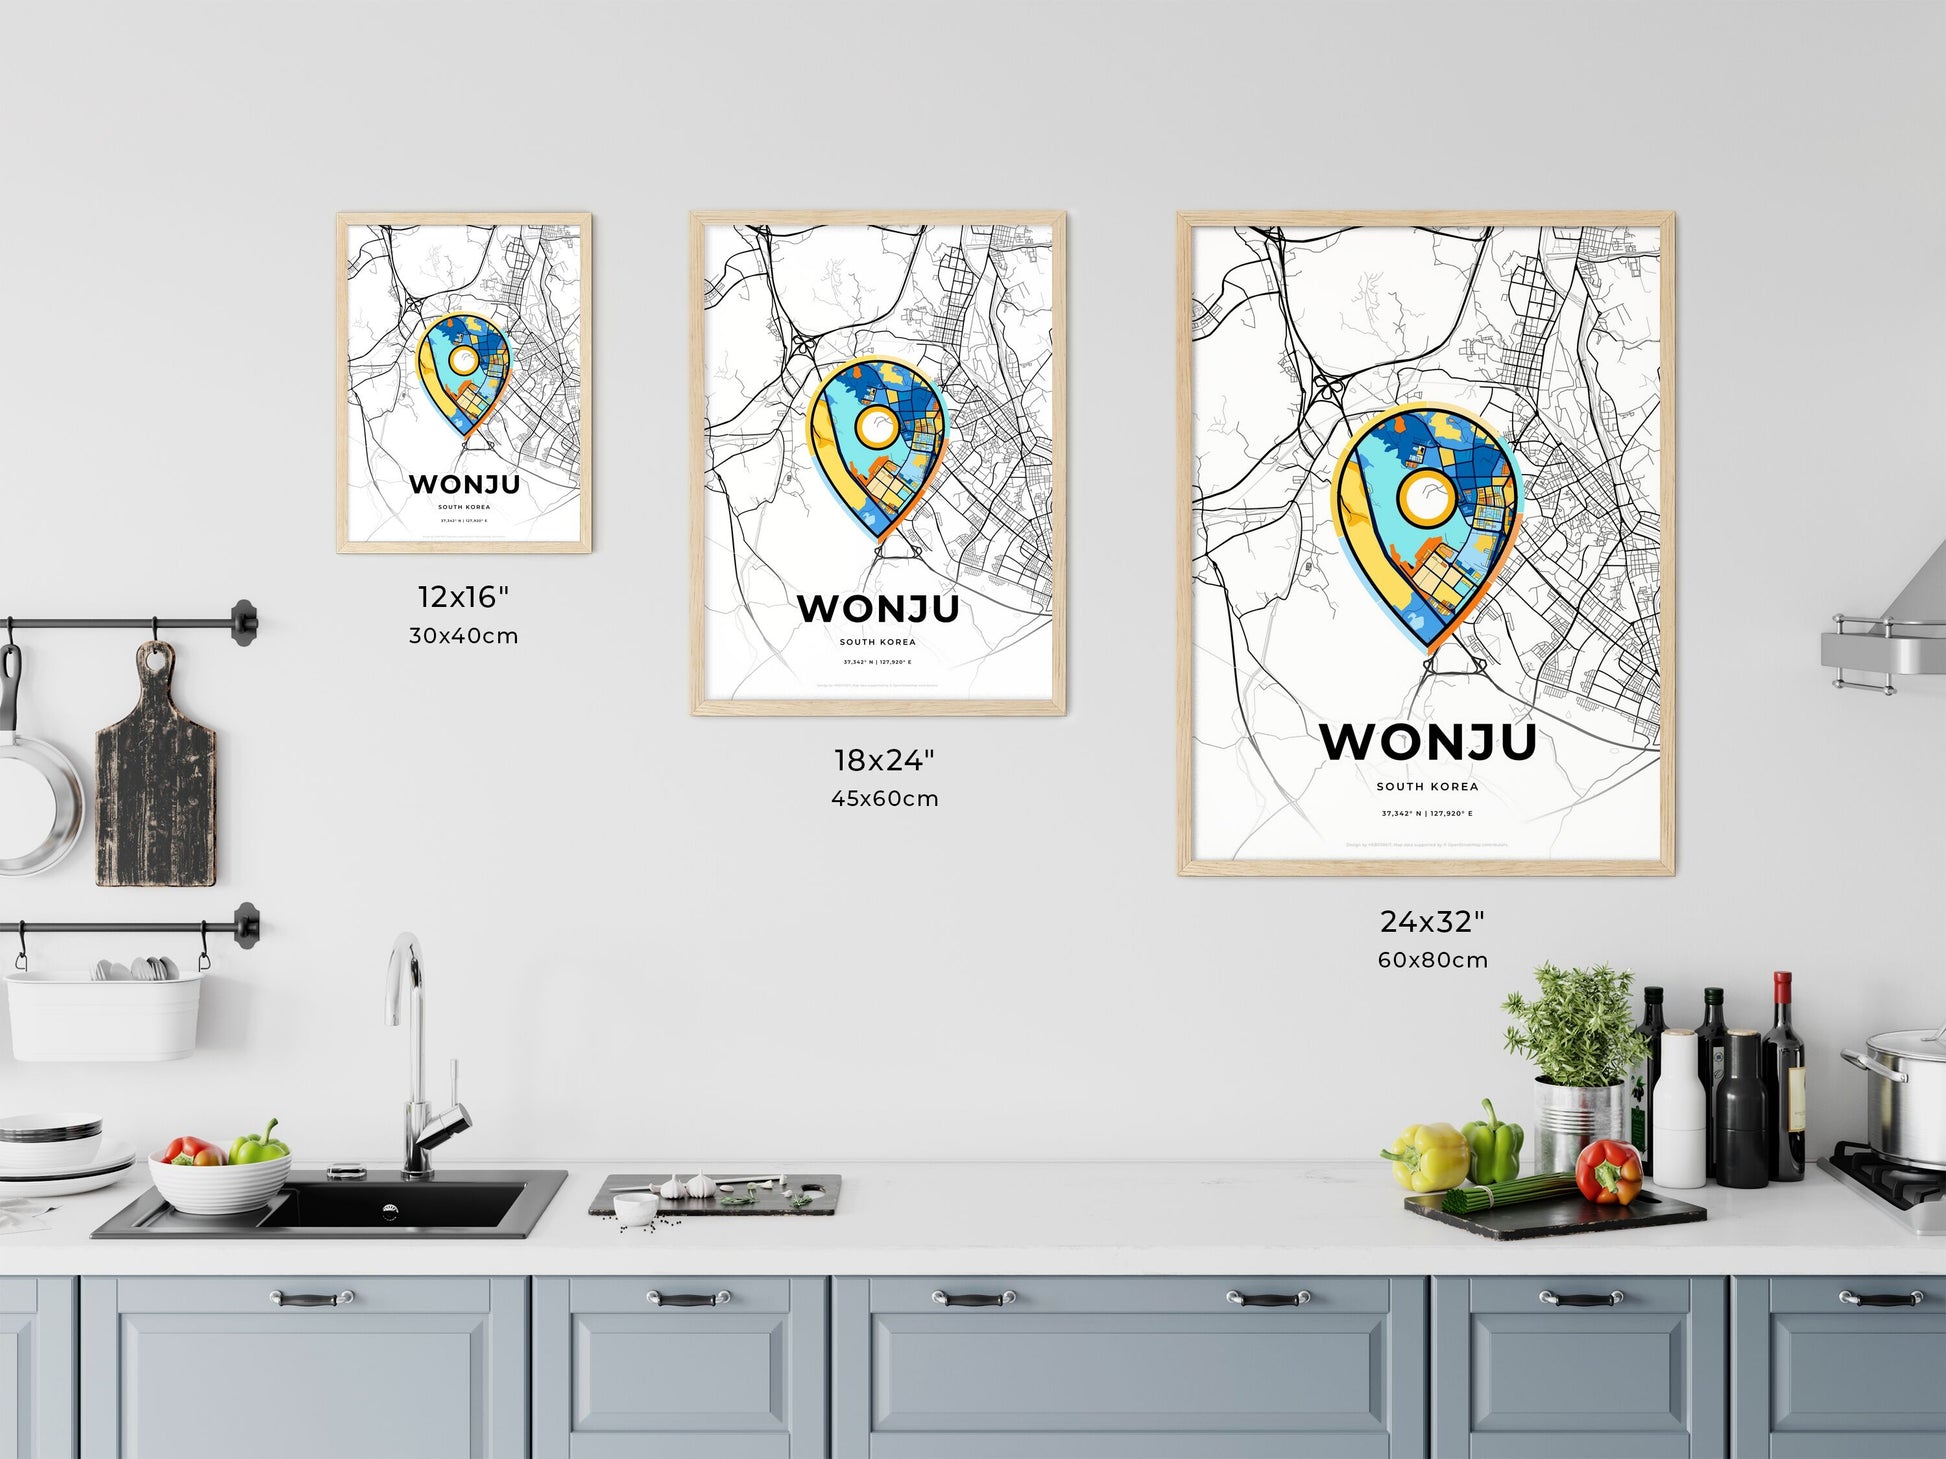 WONJU SOUTH KOREA minimal art map with a colorful icon. Where it all began, Couple map gift.